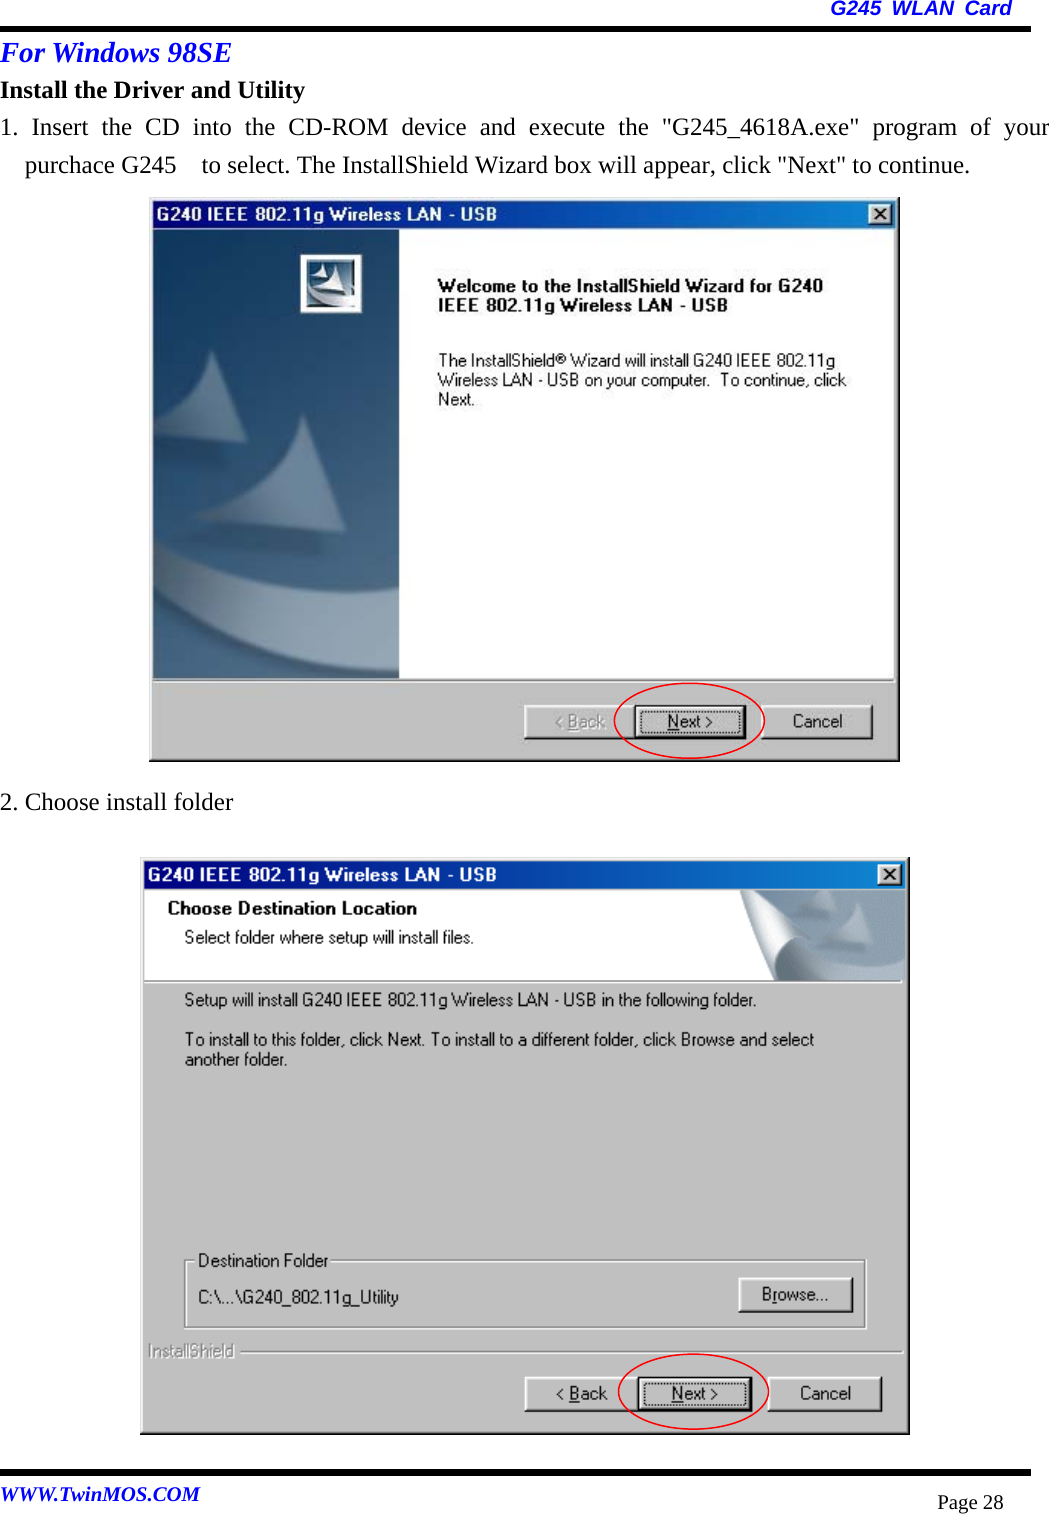   G245 WLAN Card WWW.TwinMOS.COM  Page 28For Windows 98SE   Install the Driver and Utility 1. Insert the CD into the CD-ROM device and execute the &quot;G245_4618A.exe&quot; program of your purchace G245    to select. The InstallShield Wizard box will appear, click &quot;Next&quot; to continue.                 2. Choose install folder                    